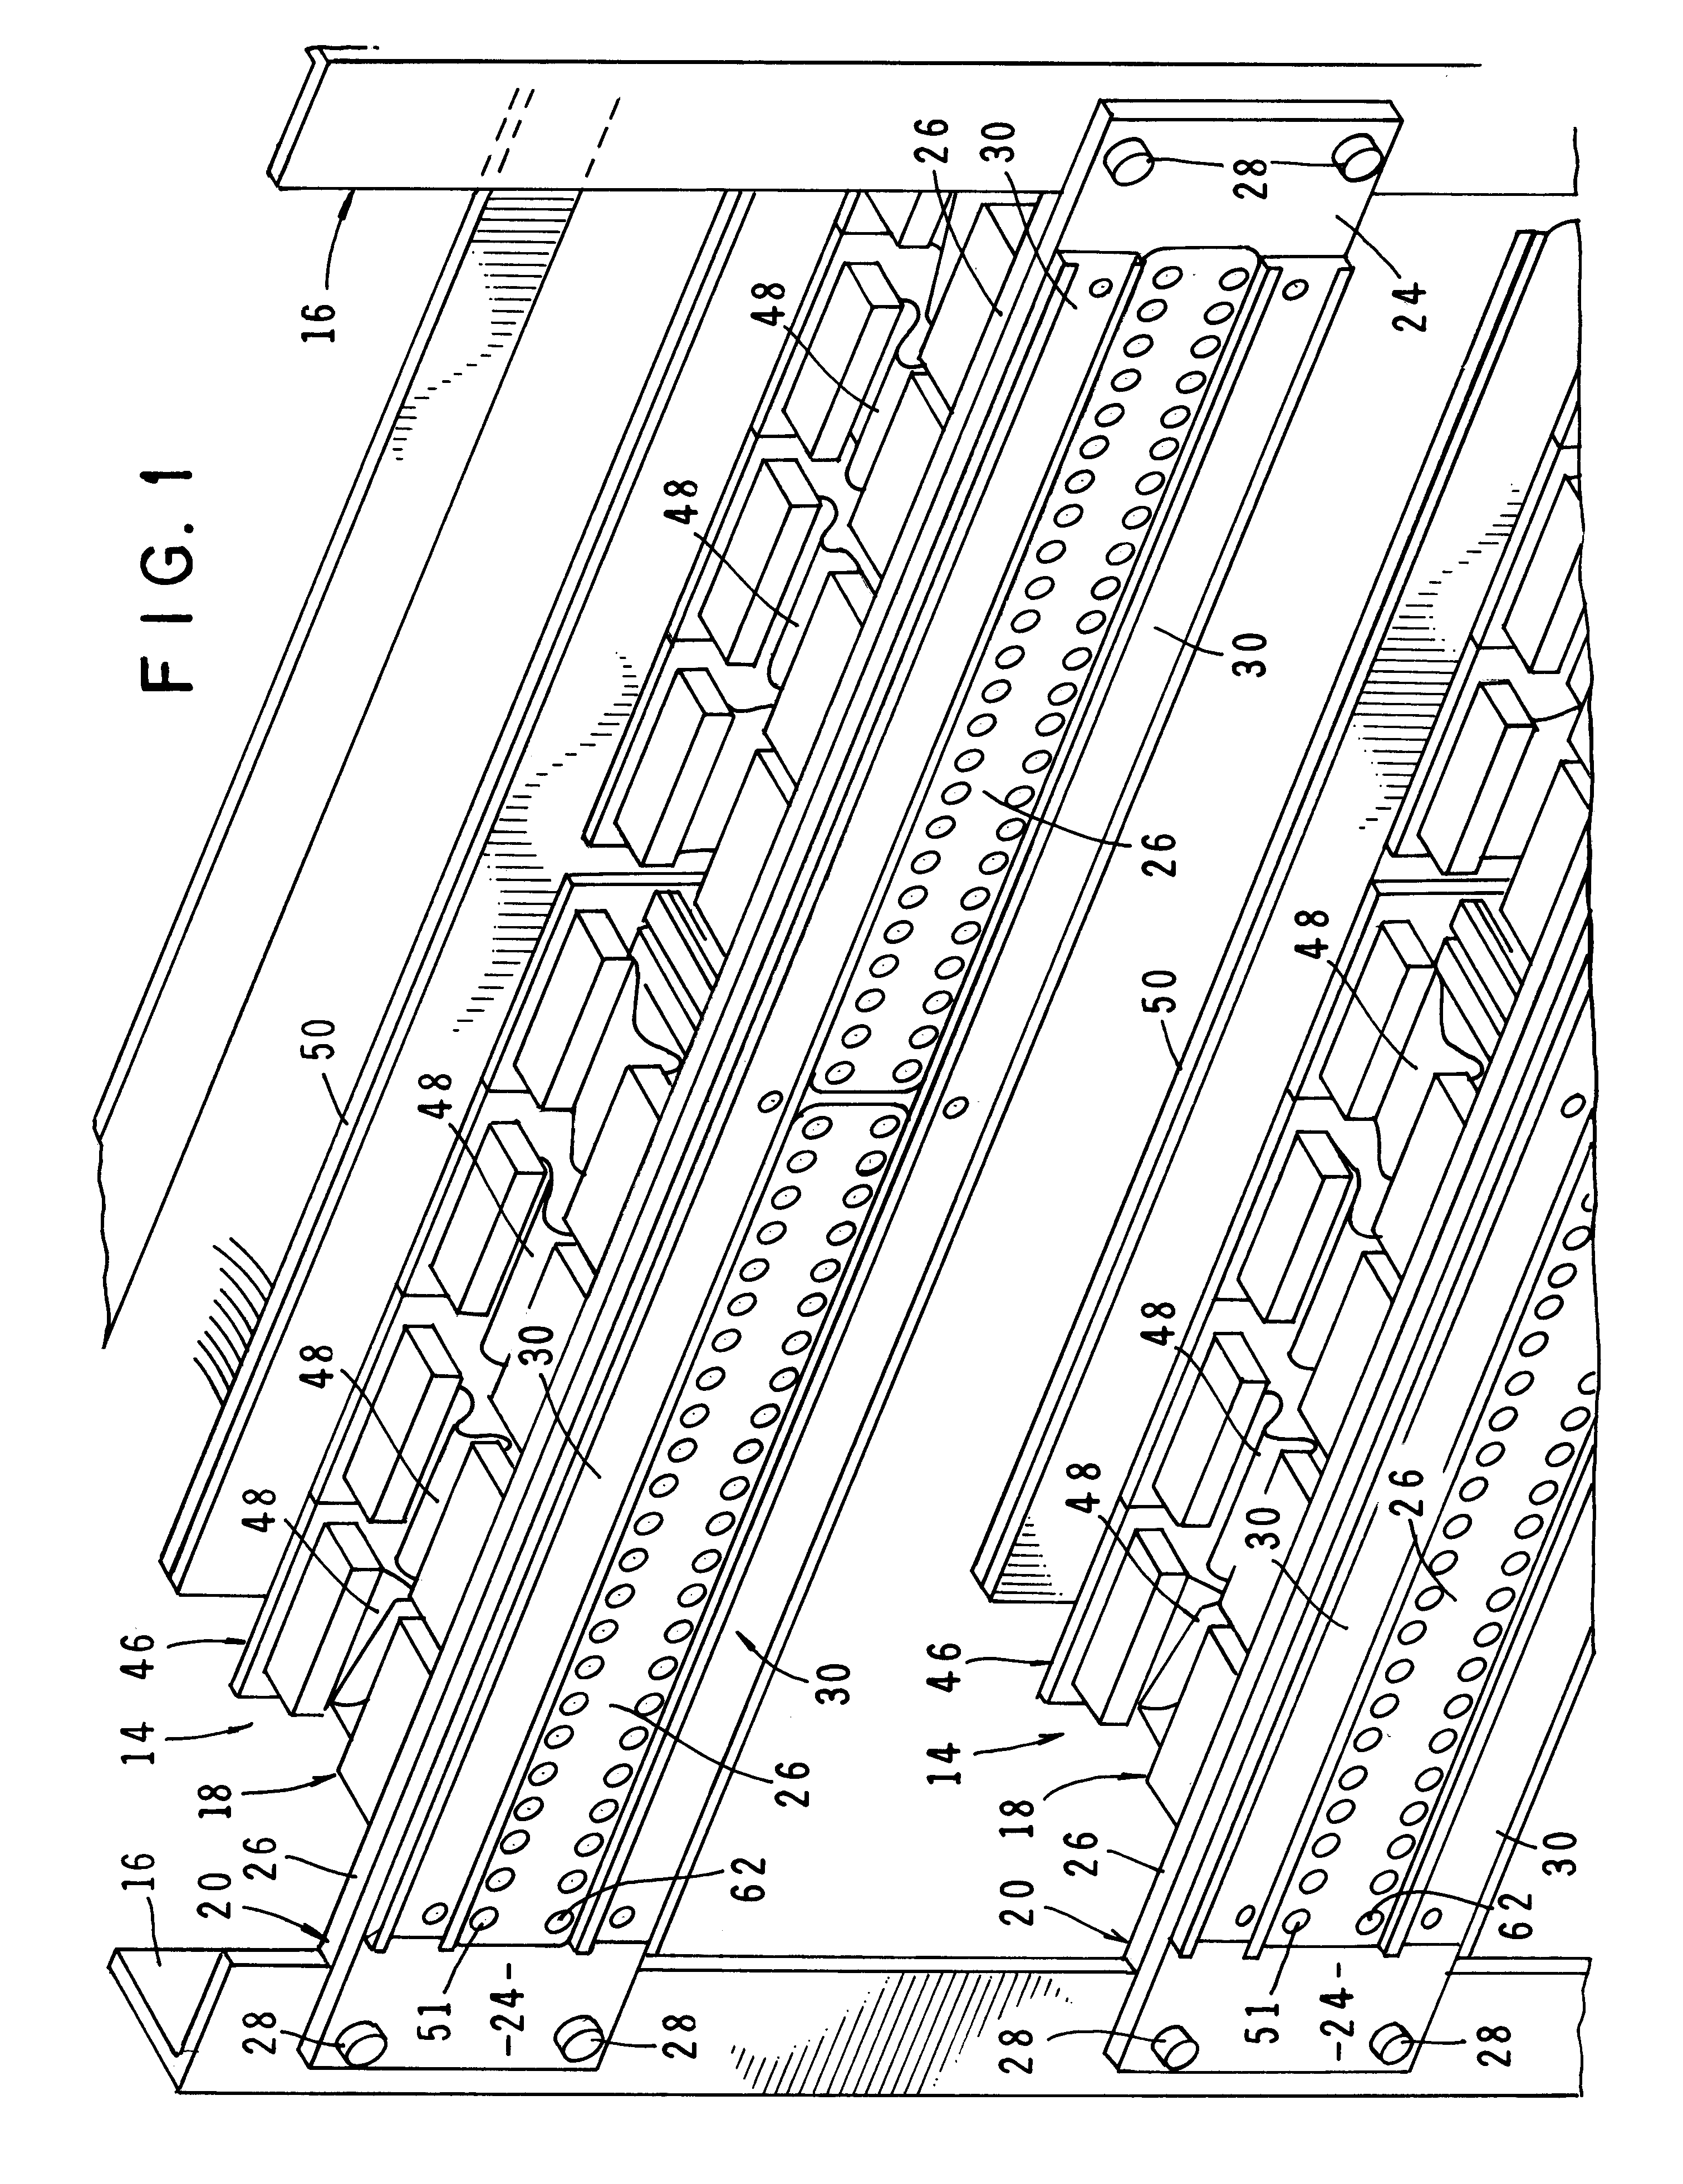 Electrical patching system